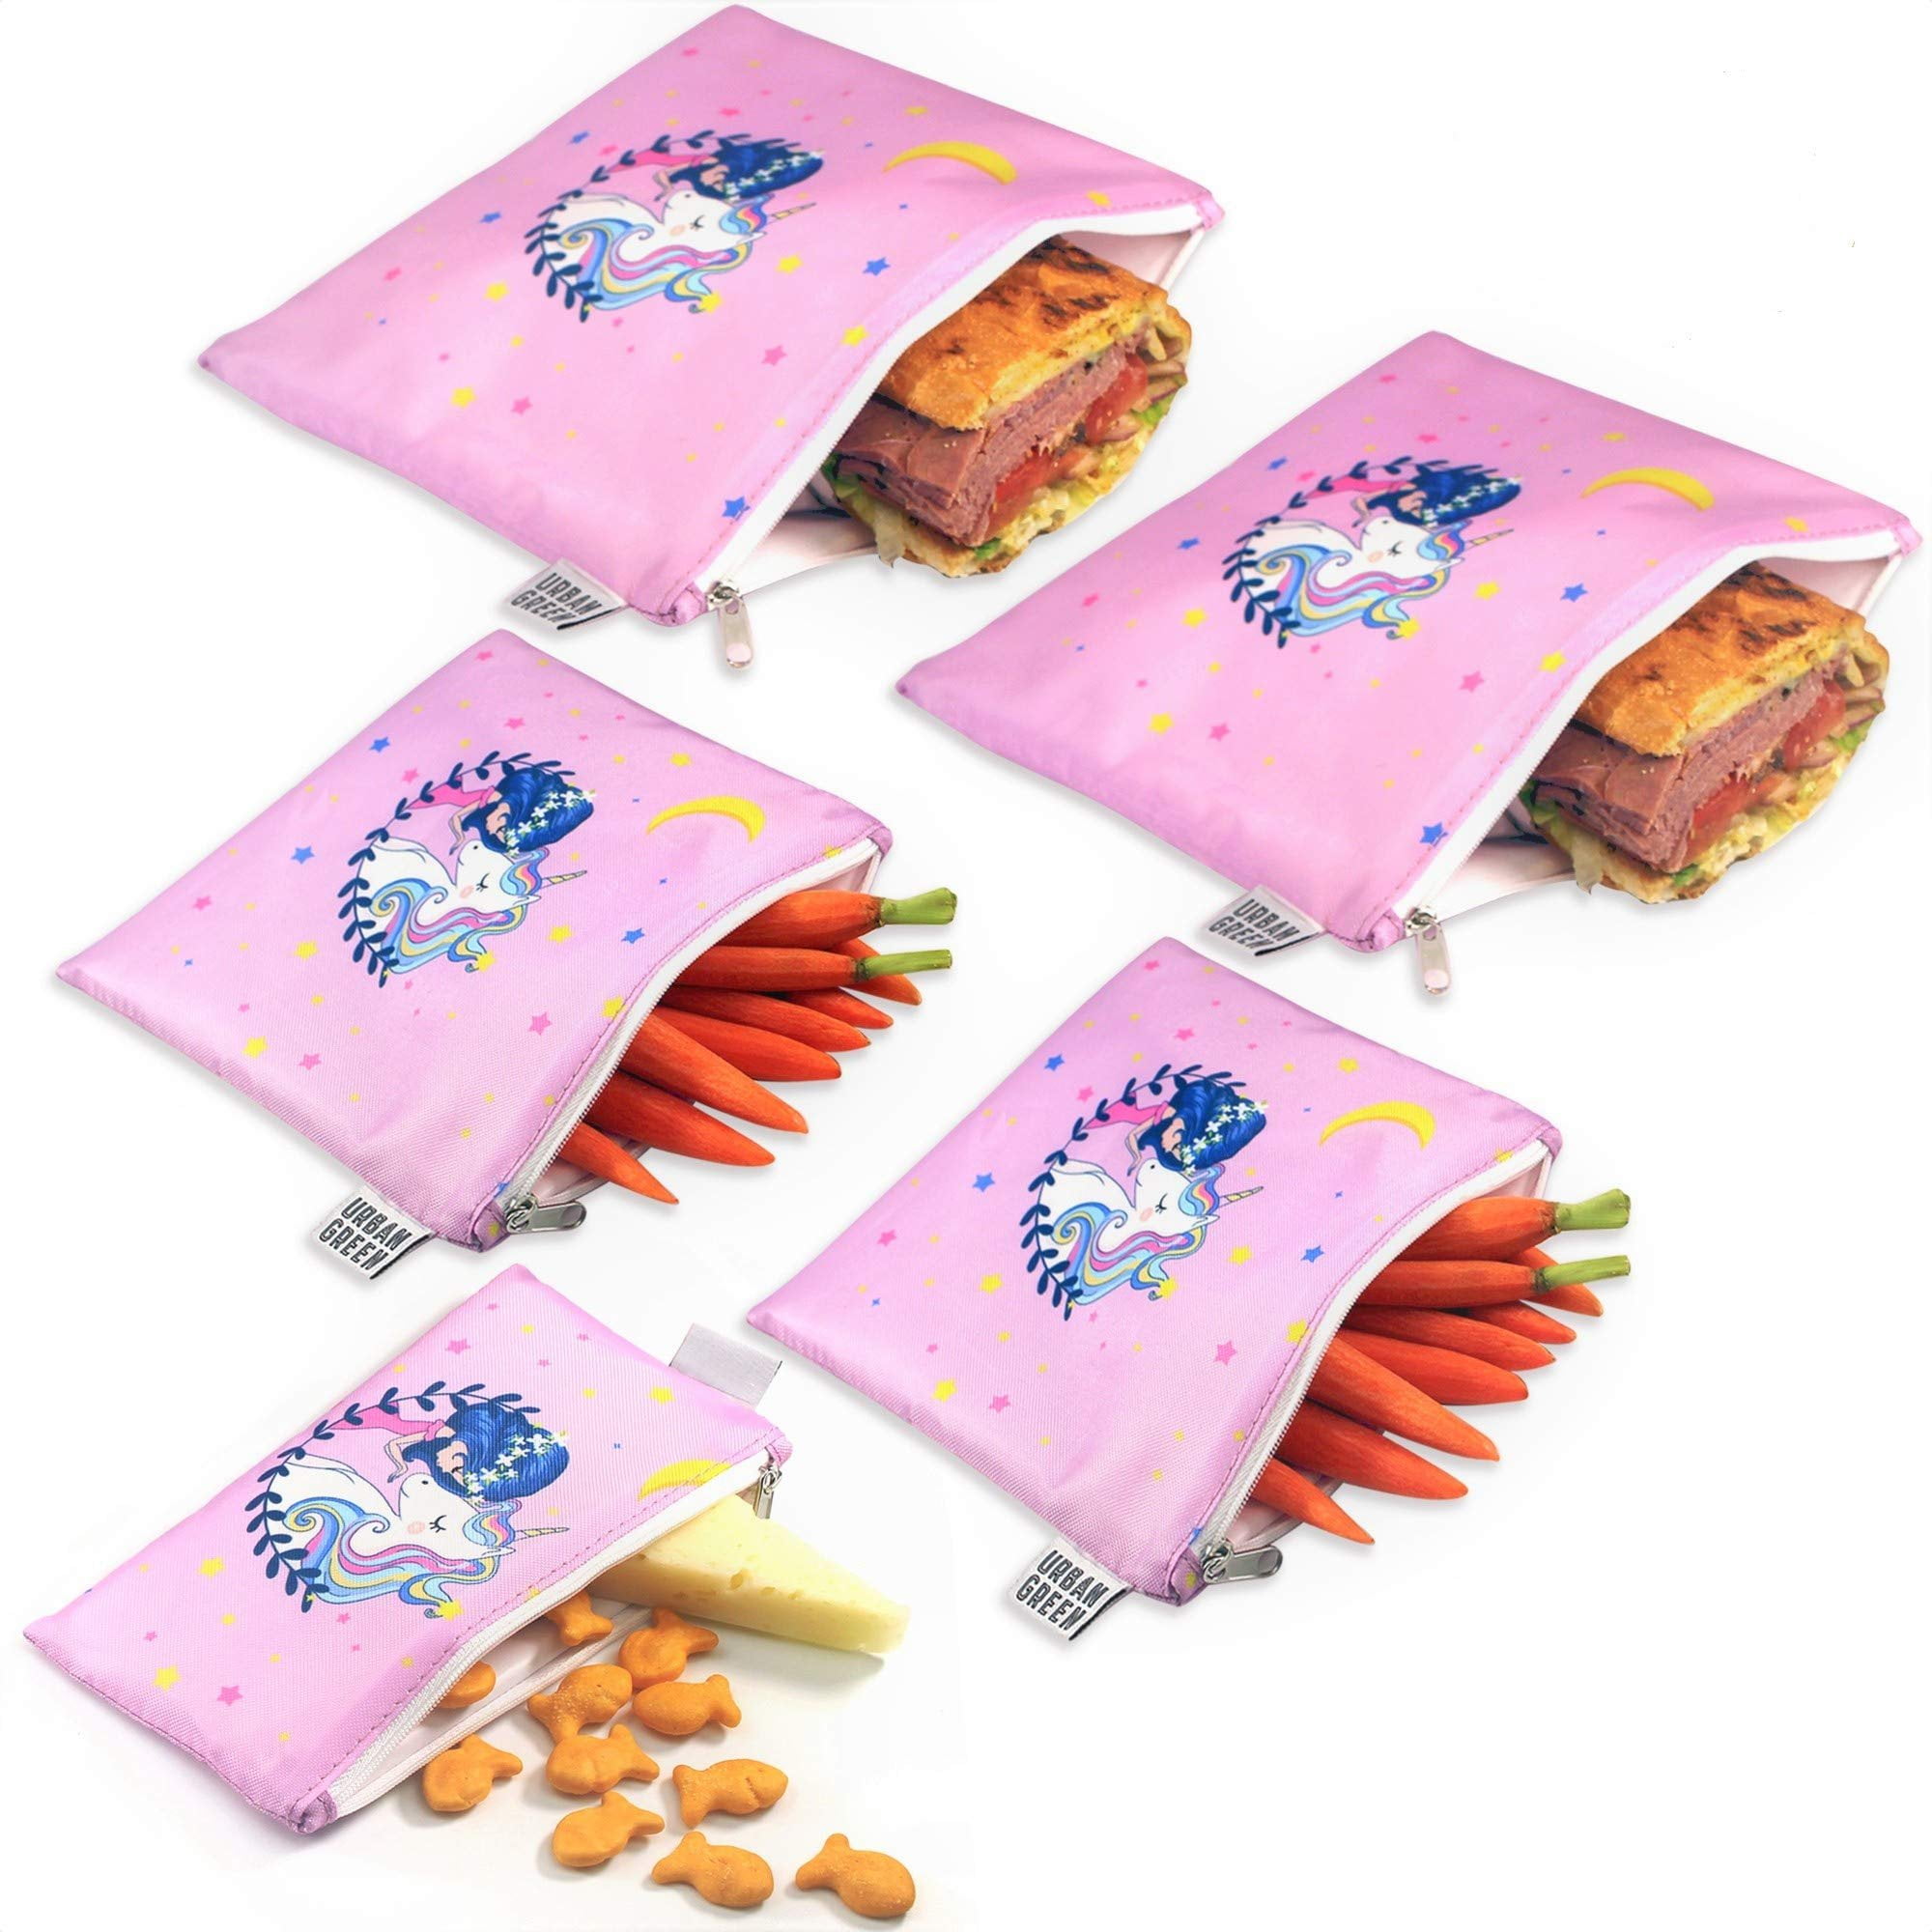 Statement Reusable Snack and Sandwich Bags, Set of 4, Blue